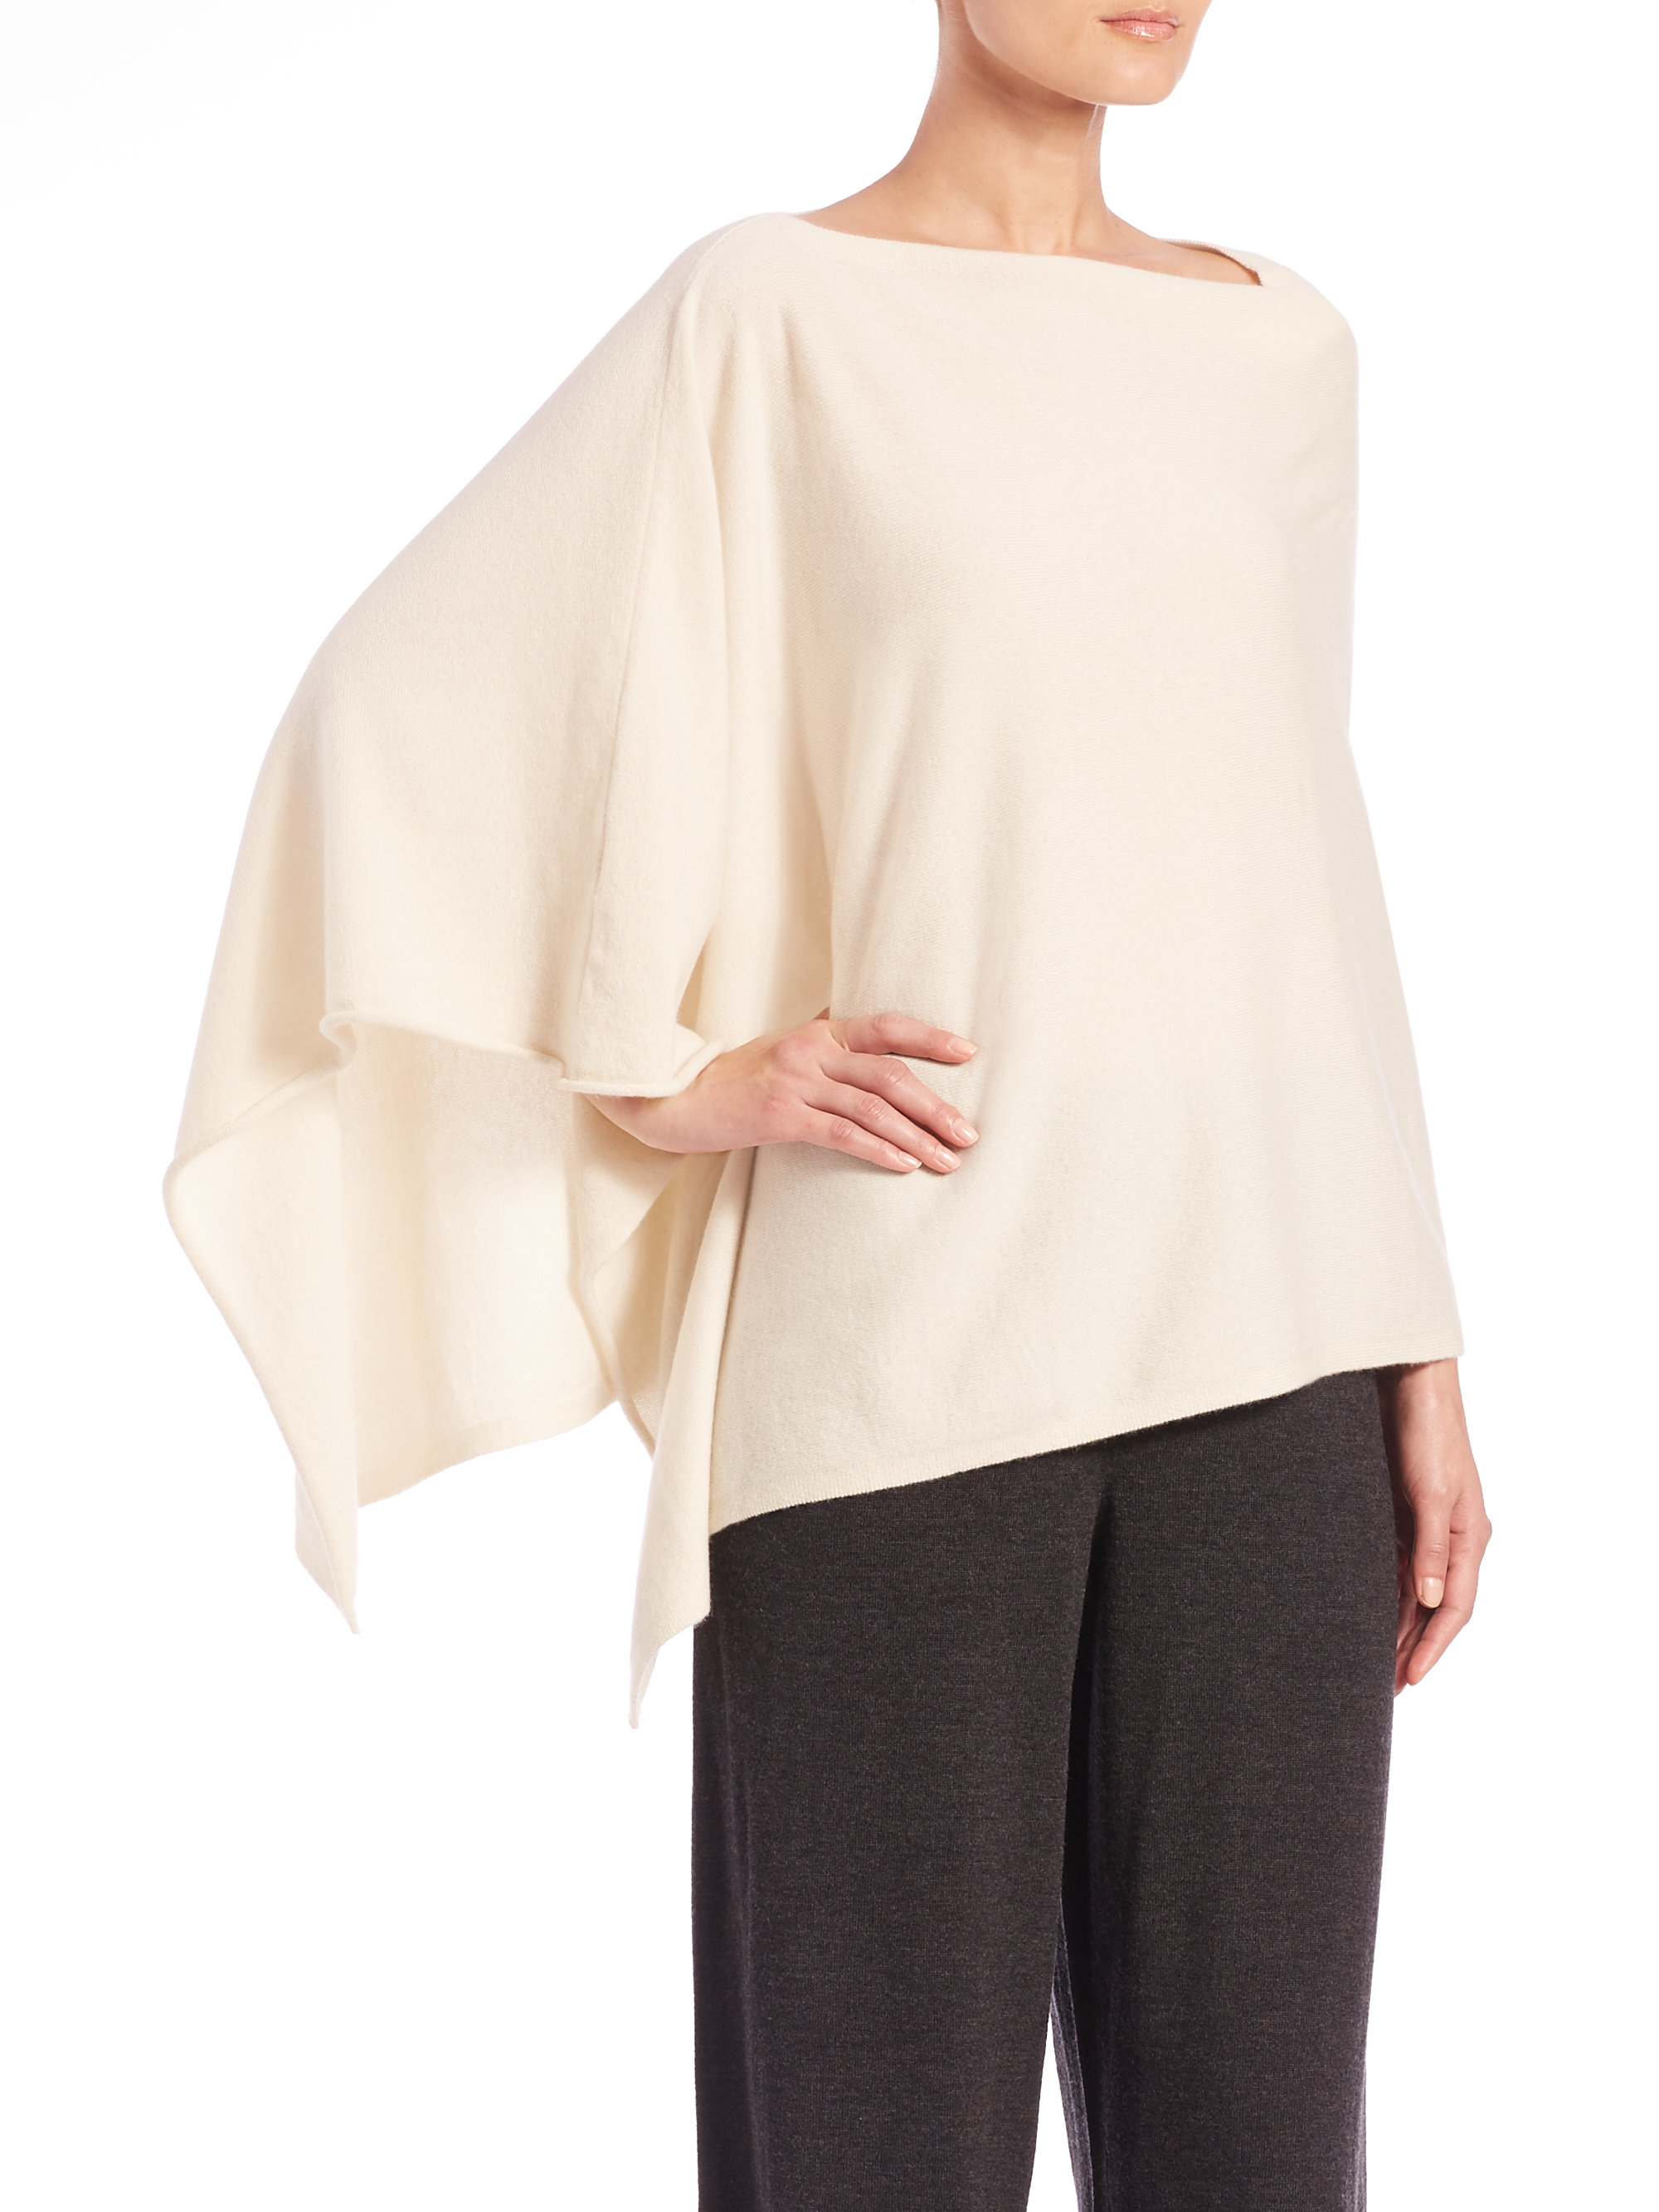 Lyst - Eileen Fisher Italian Cashmere Poncho in Natural